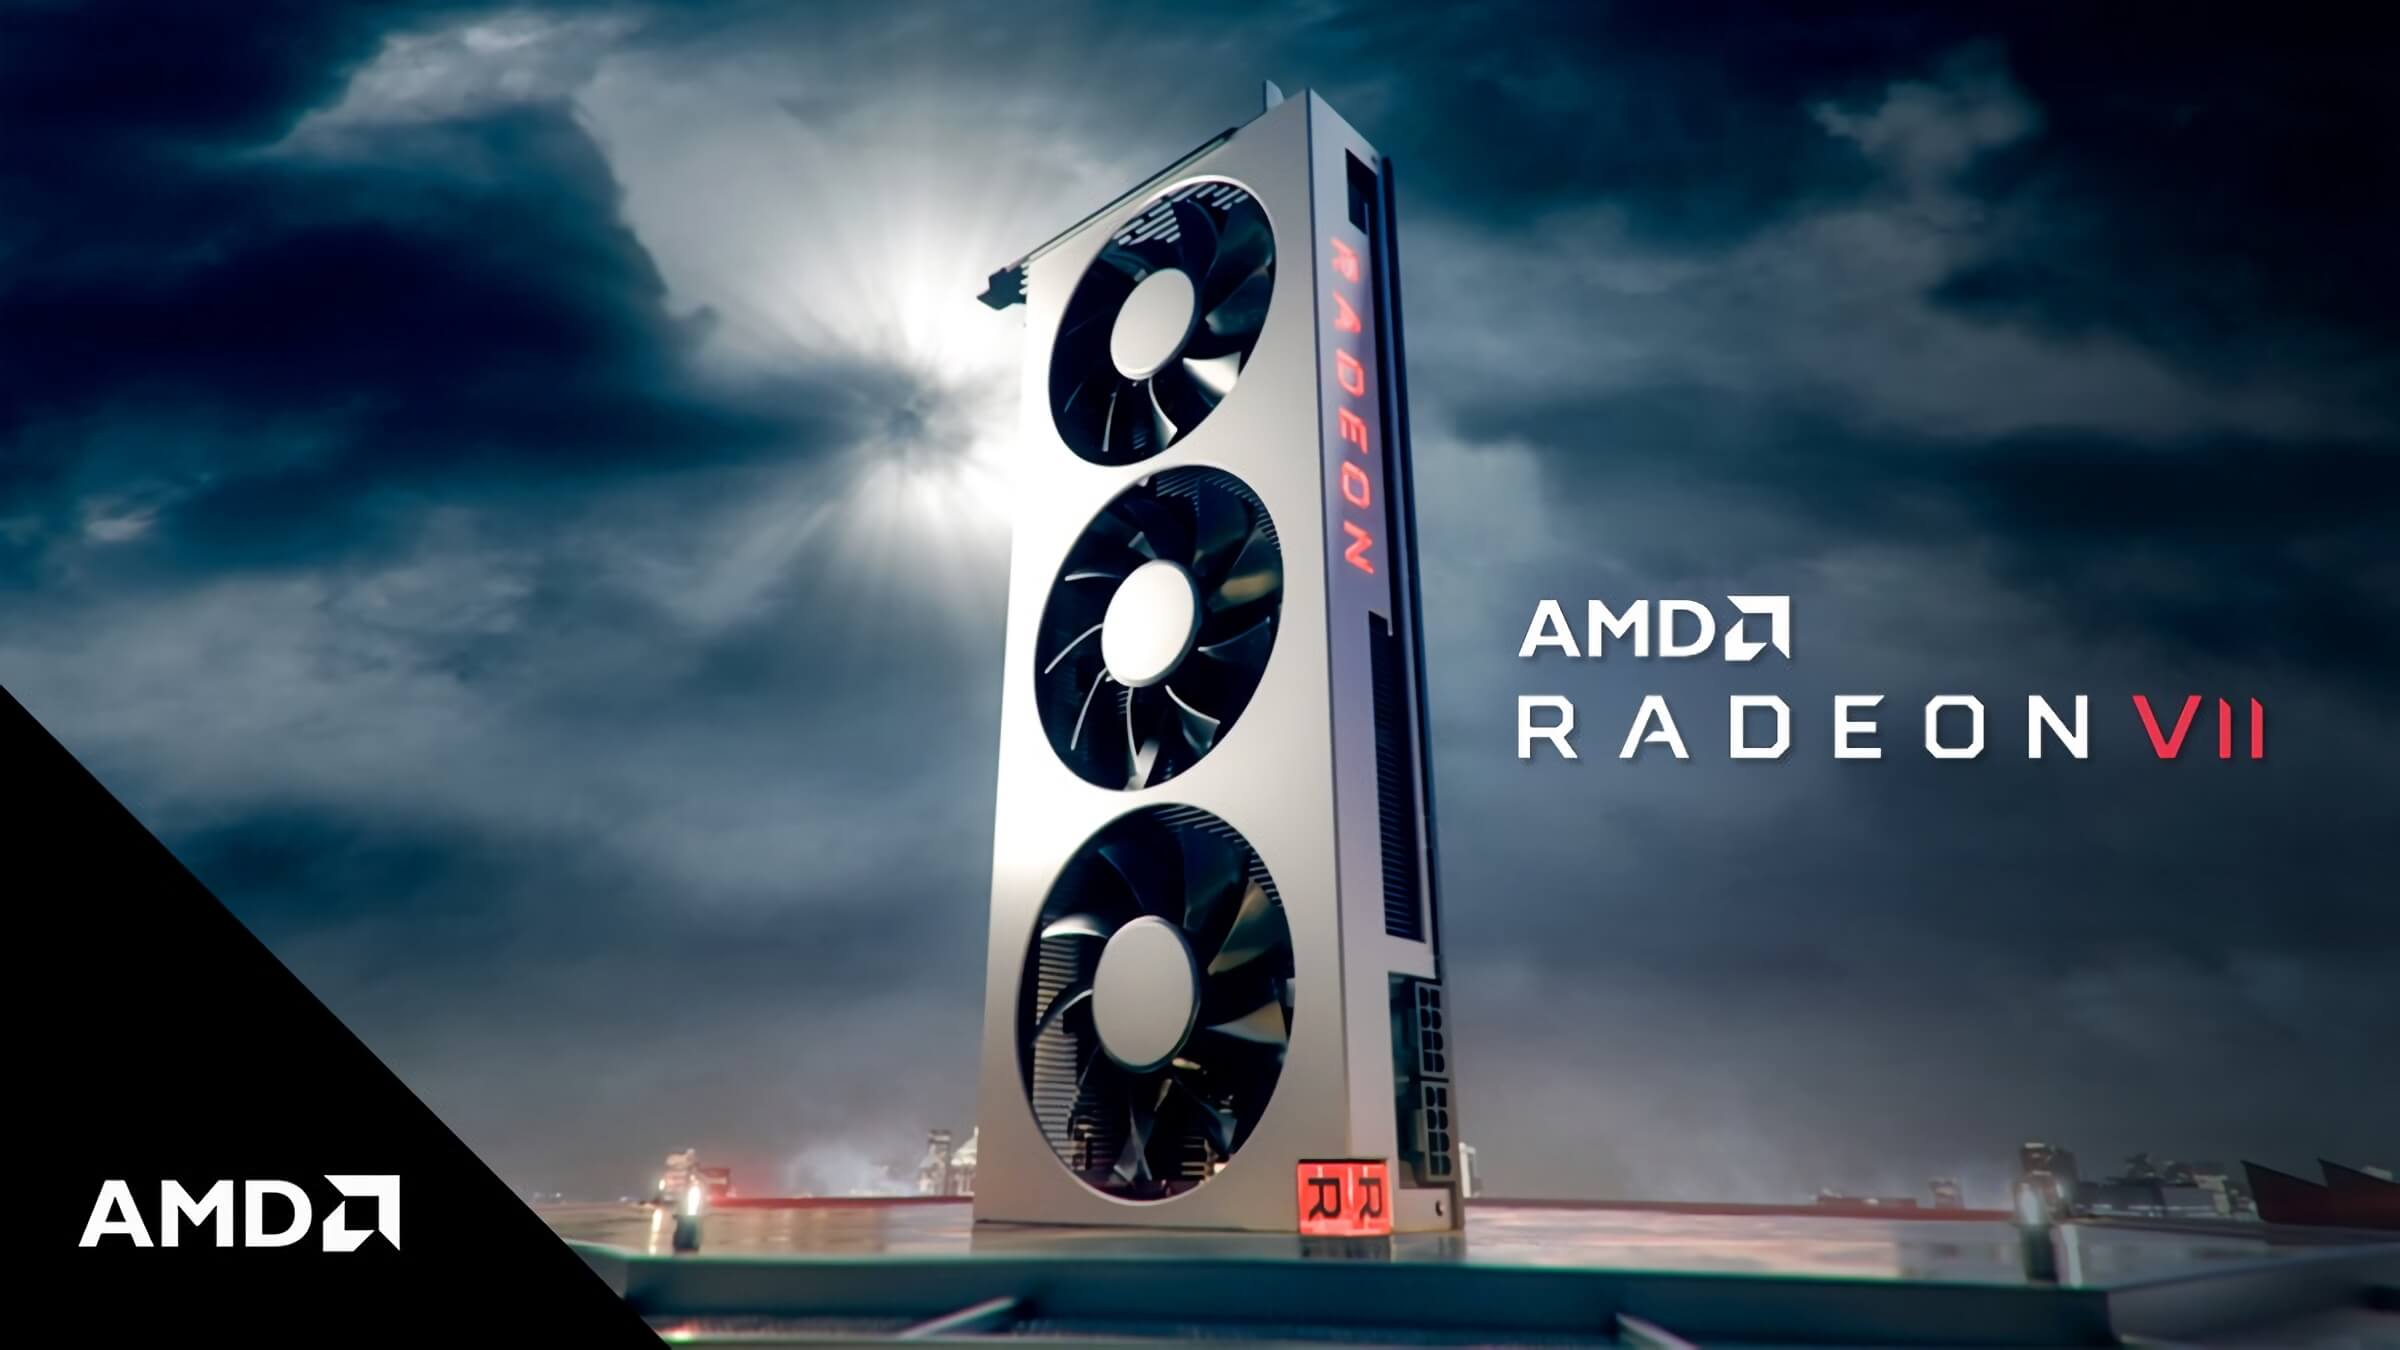 AMD Radeon VII: world's first 7nm gaming GPU is 25-35% faster than Vega 64, ships February 7 for $699